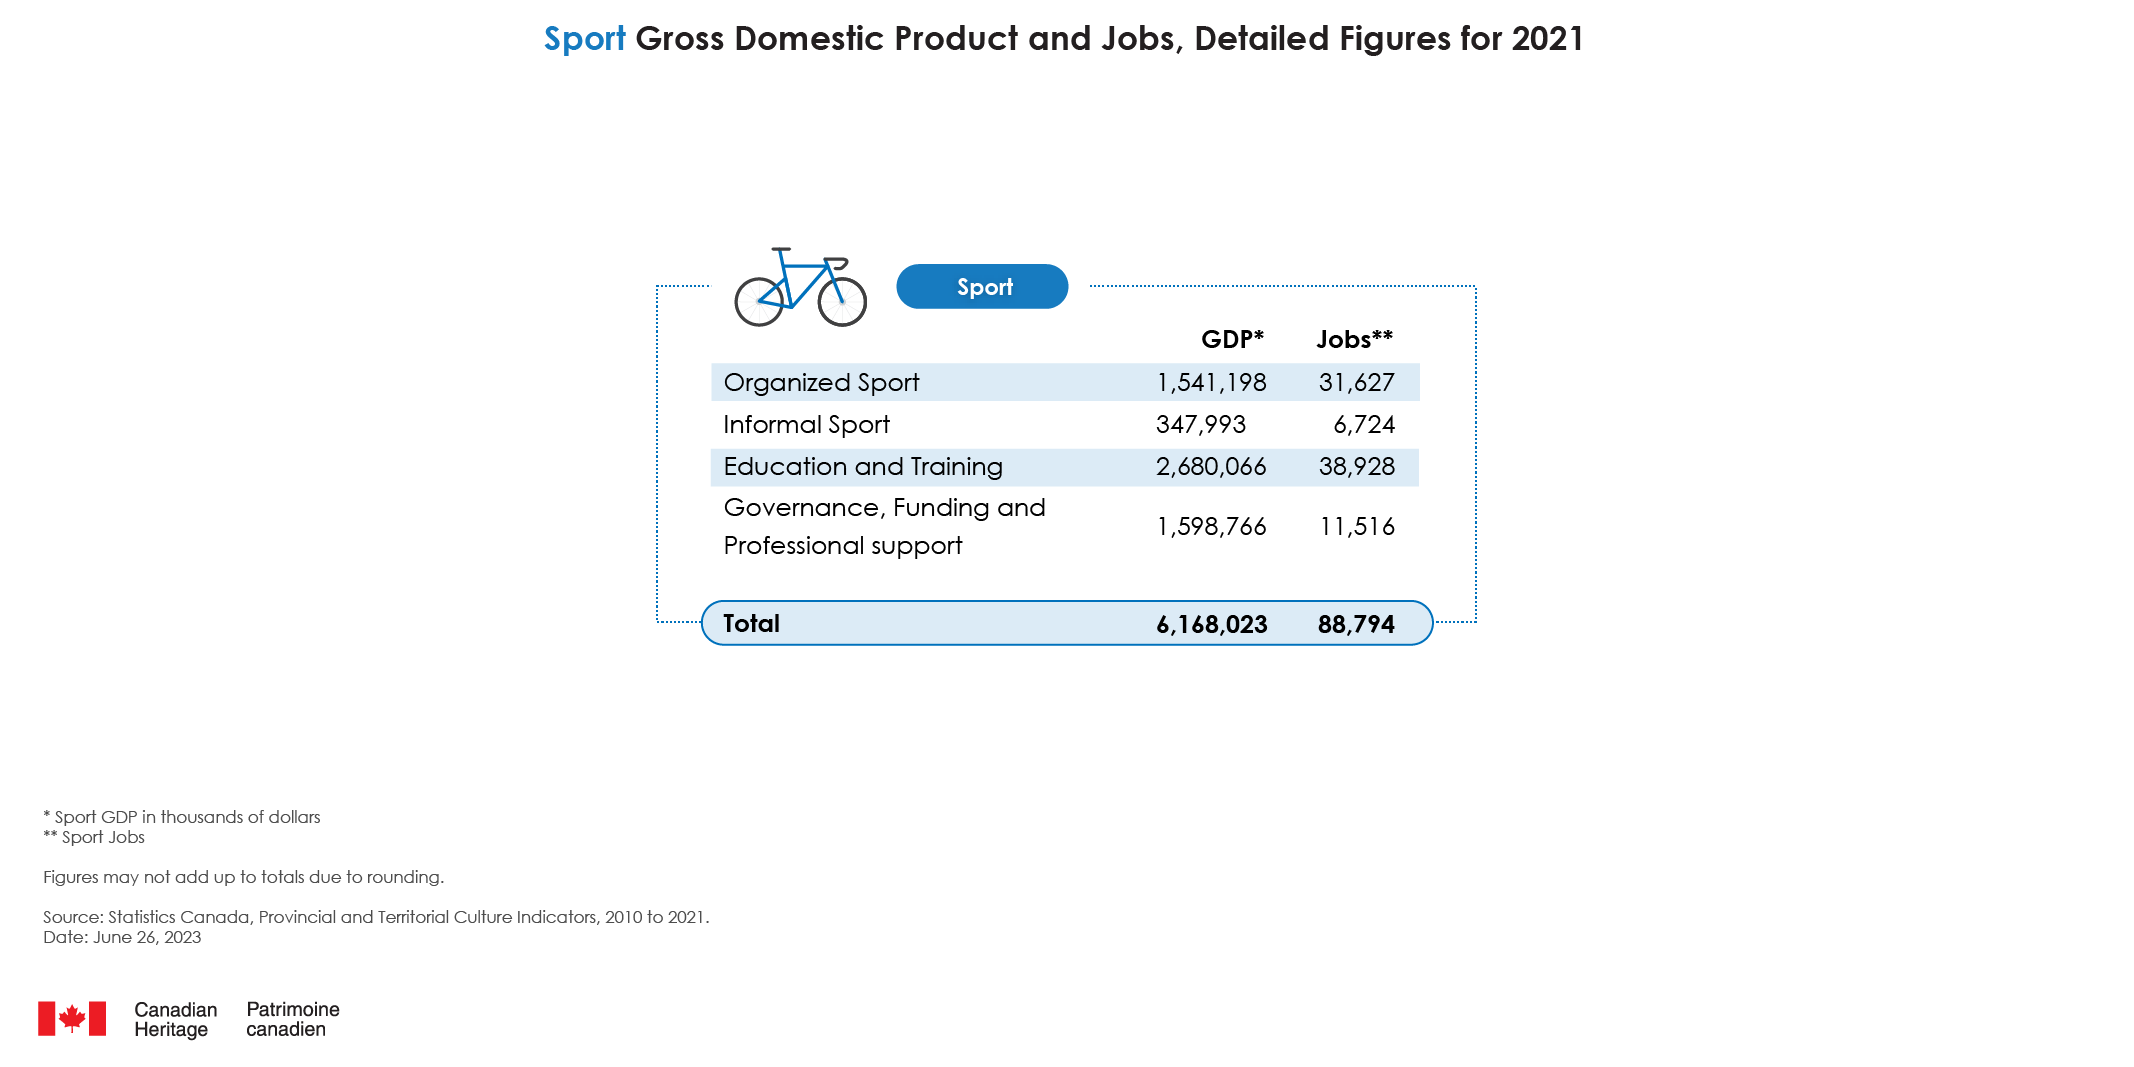 Infographic of Sport Gross Domestic Product and Jobs, Detailed Figures for 2021